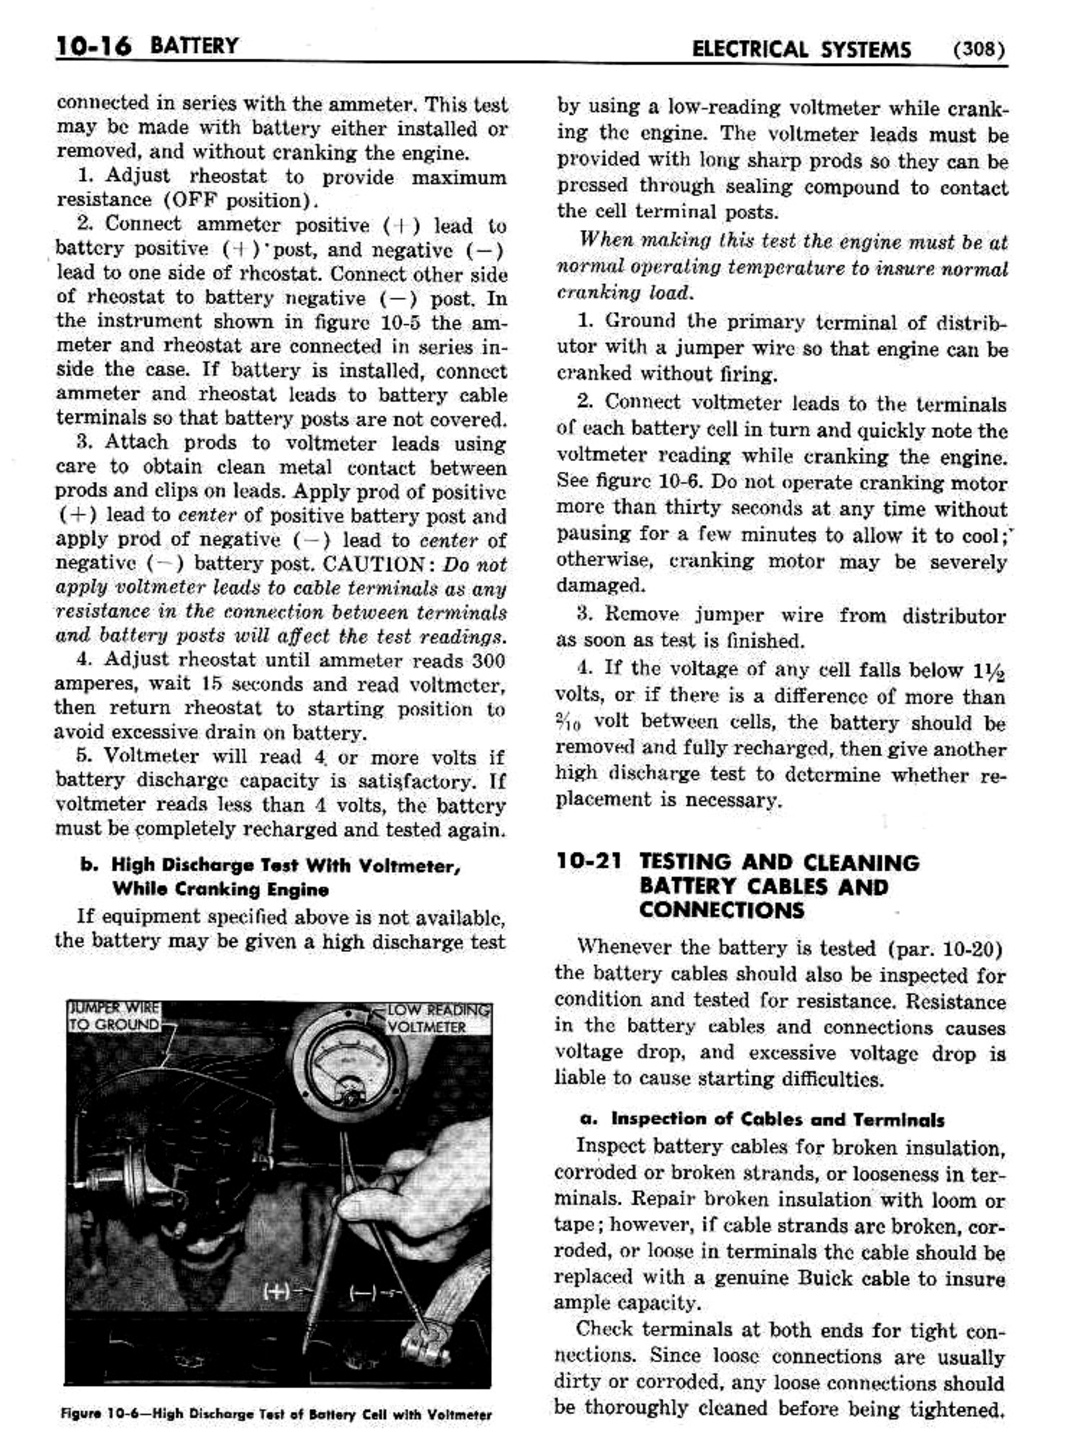 n_11 1951 Buick Shop Manual - Electrical Systems-016-016.jpg